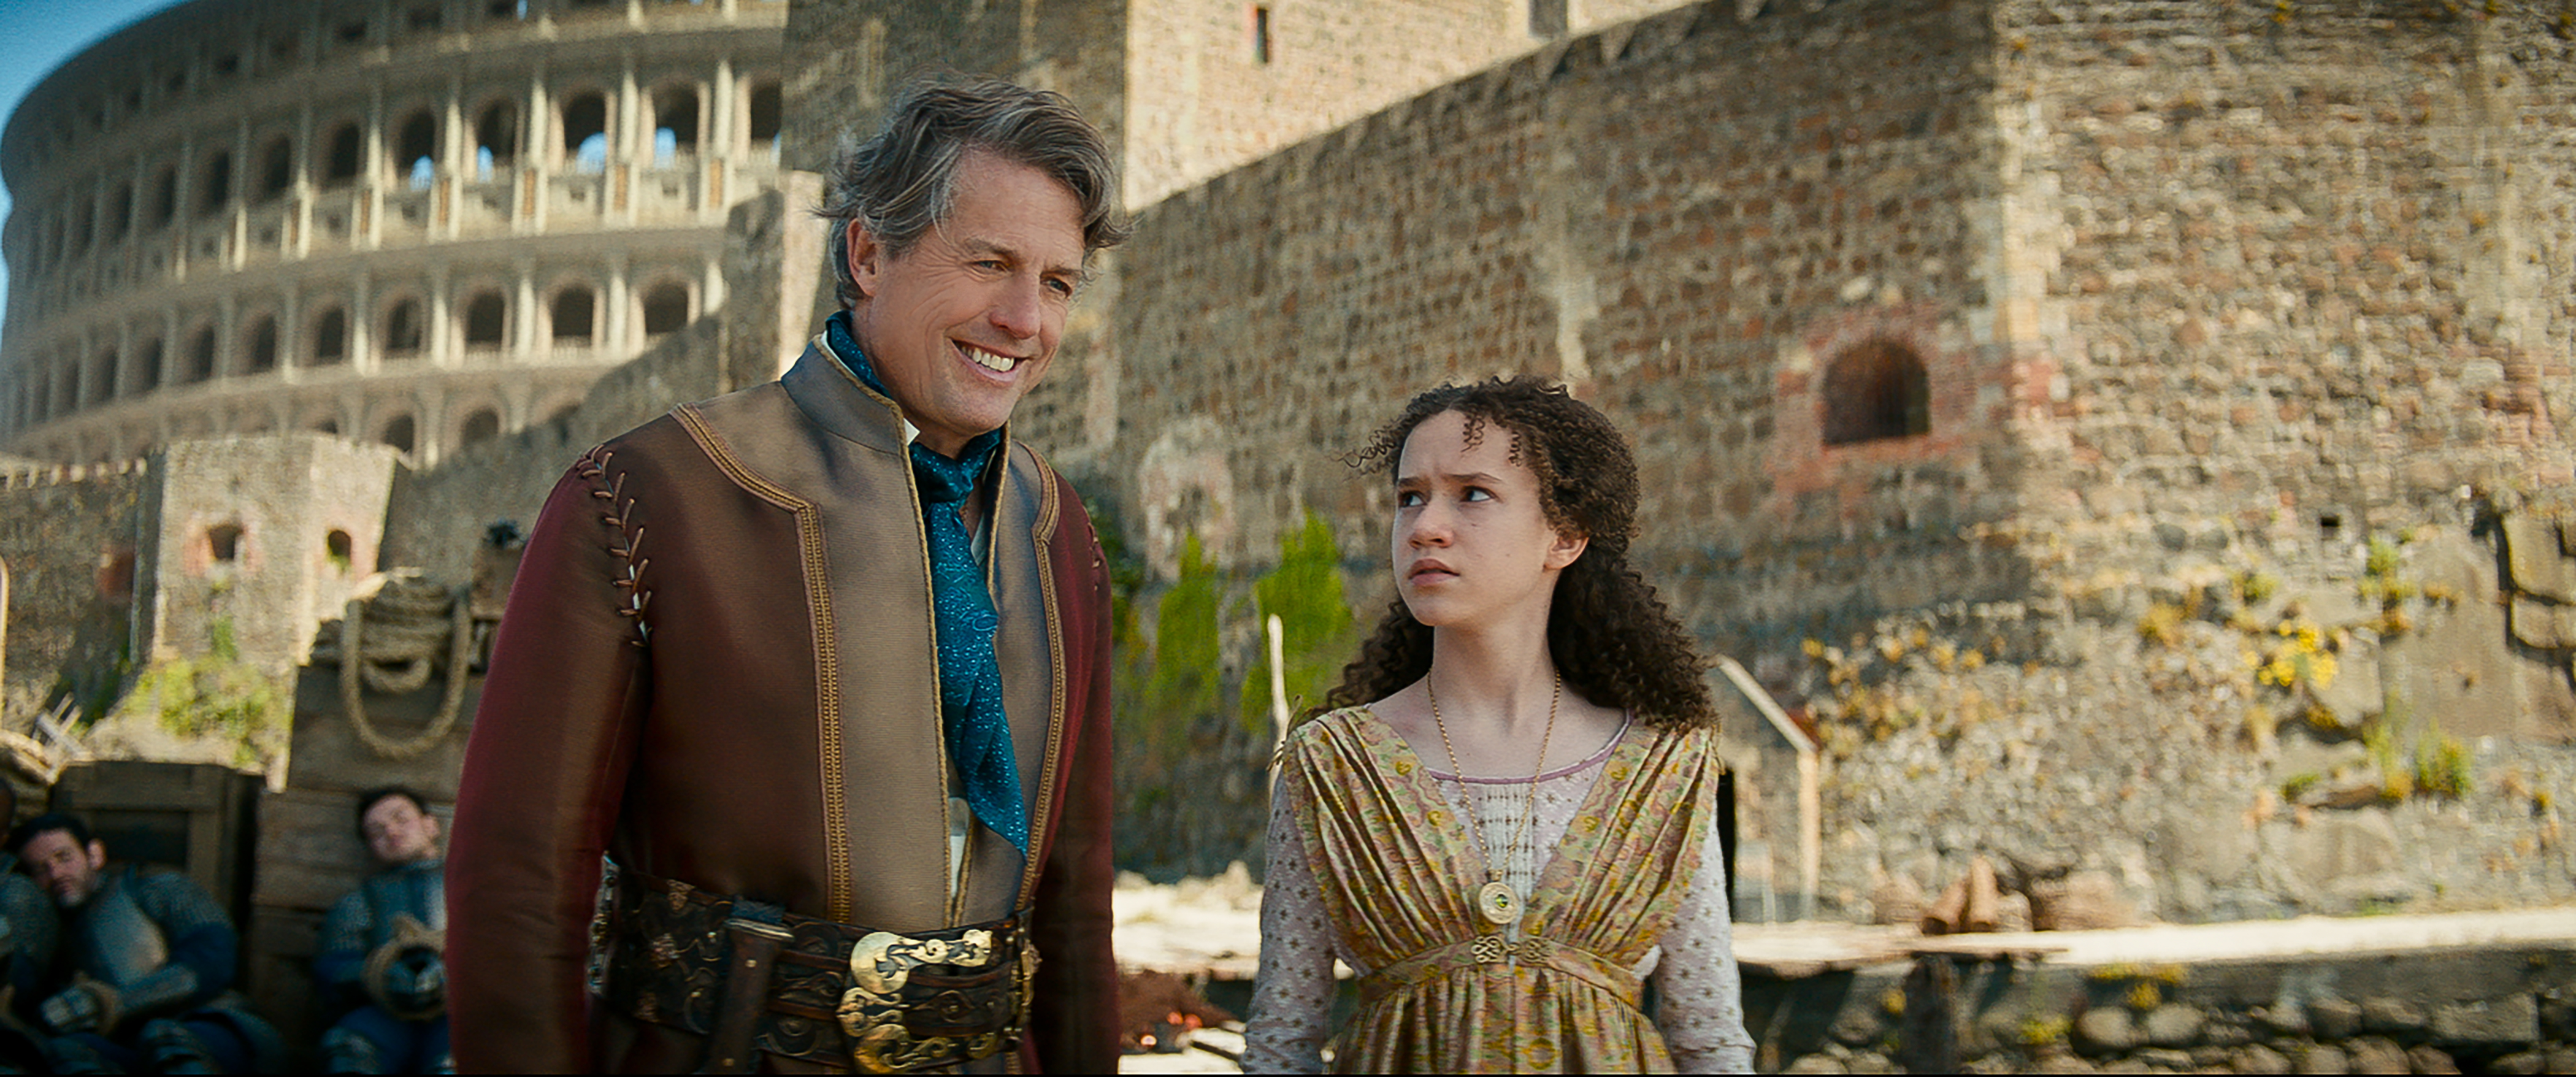 Hugh Grant plays Forge and Chloe Coleman plays Kira in 'Dungeons & Dragons: Honor Among Thieves'. Image: Paramount Pictures / eOne / Supplied